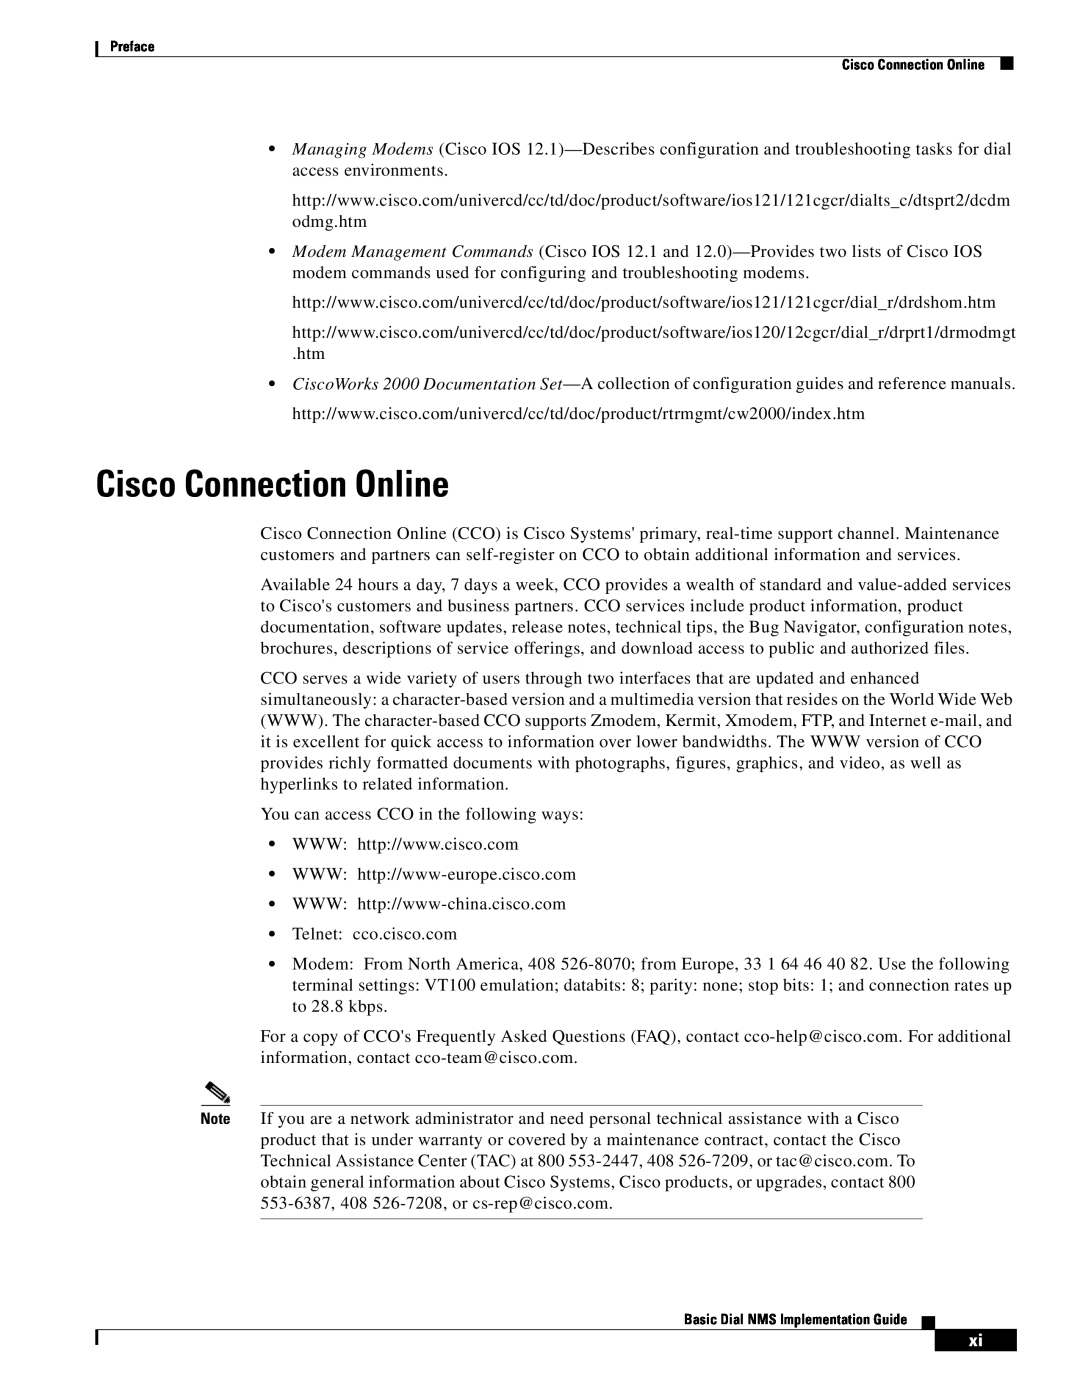 Cisco Systems Dial NMS manual Cisco Connection Online 